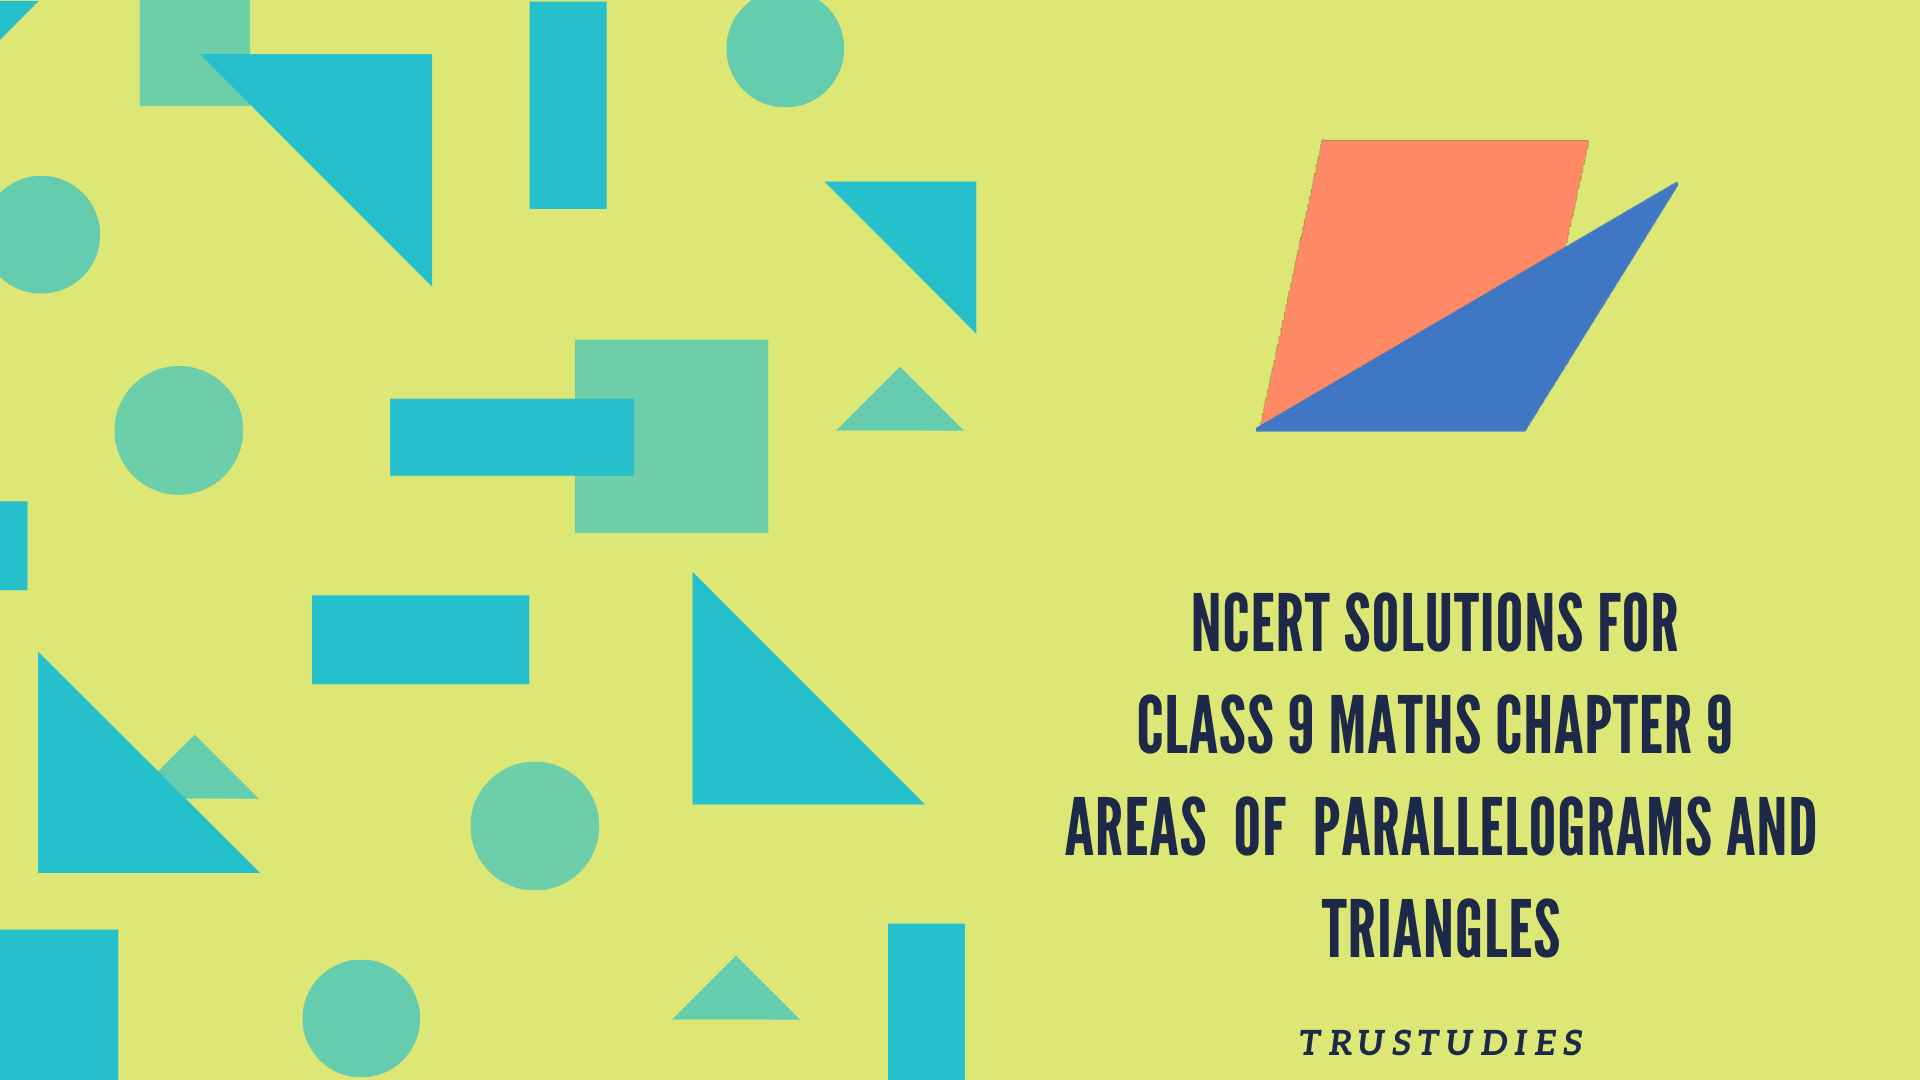 NCERT solutions for class 9 maths chapter 9 areas of parallelograms and triangles banner image